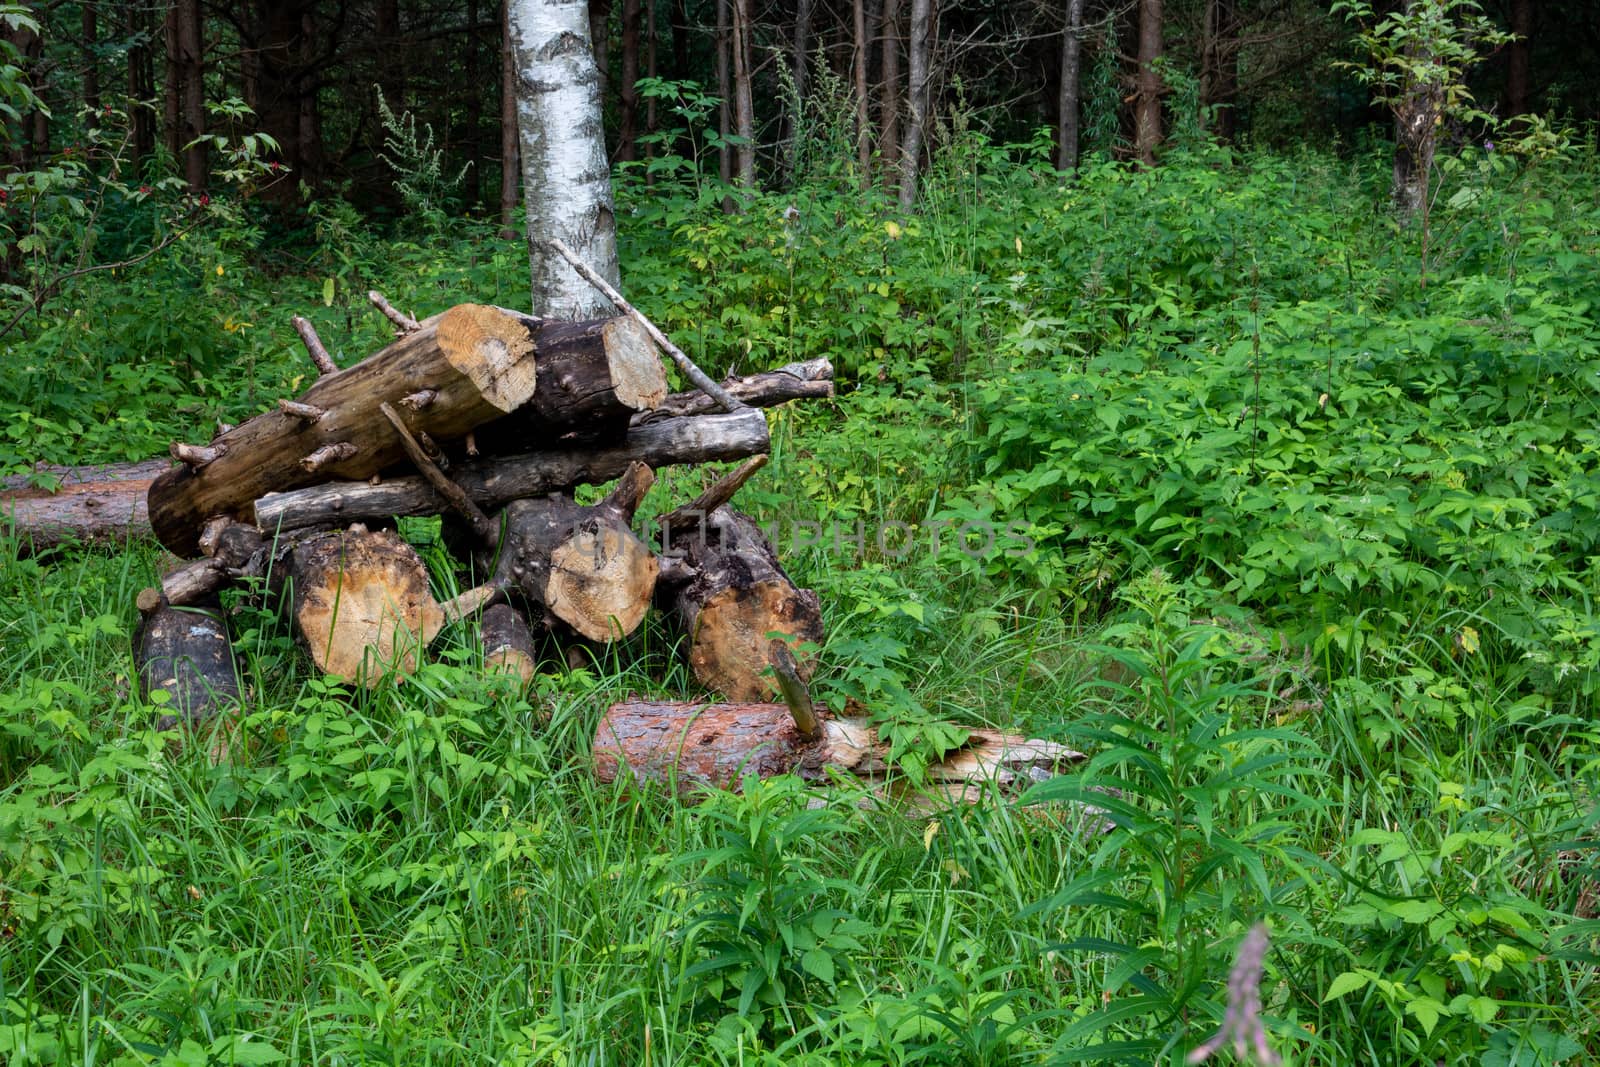 Sawn tree trunk. The wood was cut into stumps in the forest. Firewood from the sawed pine trees lie on the ground. by lapushka62